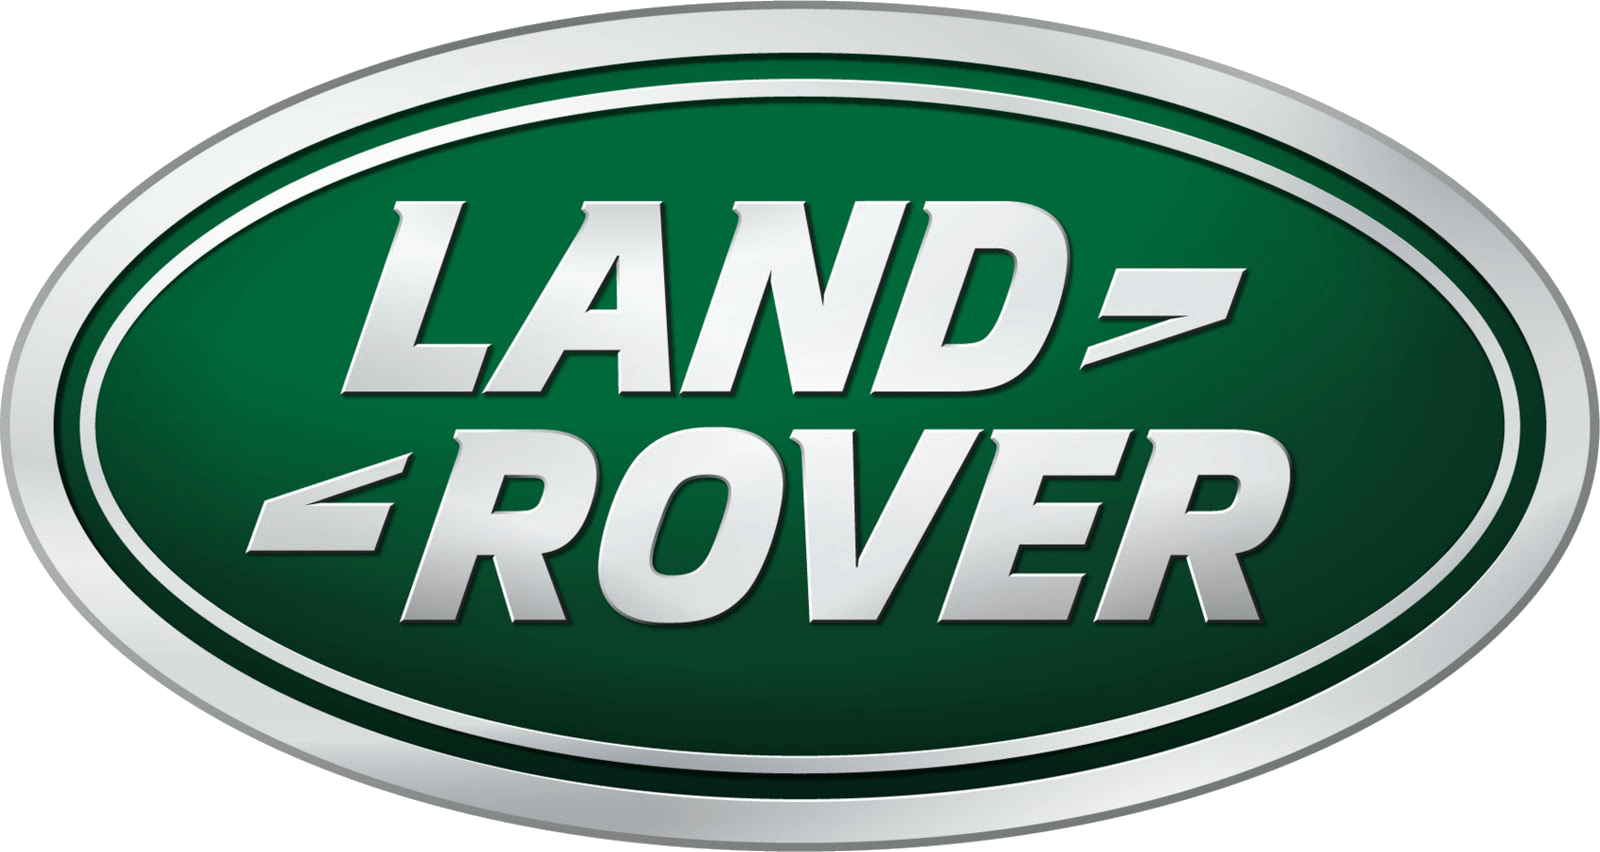 Black Blue Oval Logo - Land Rover Logo, Land Rover Car Symbol Meaning and History | Car ...